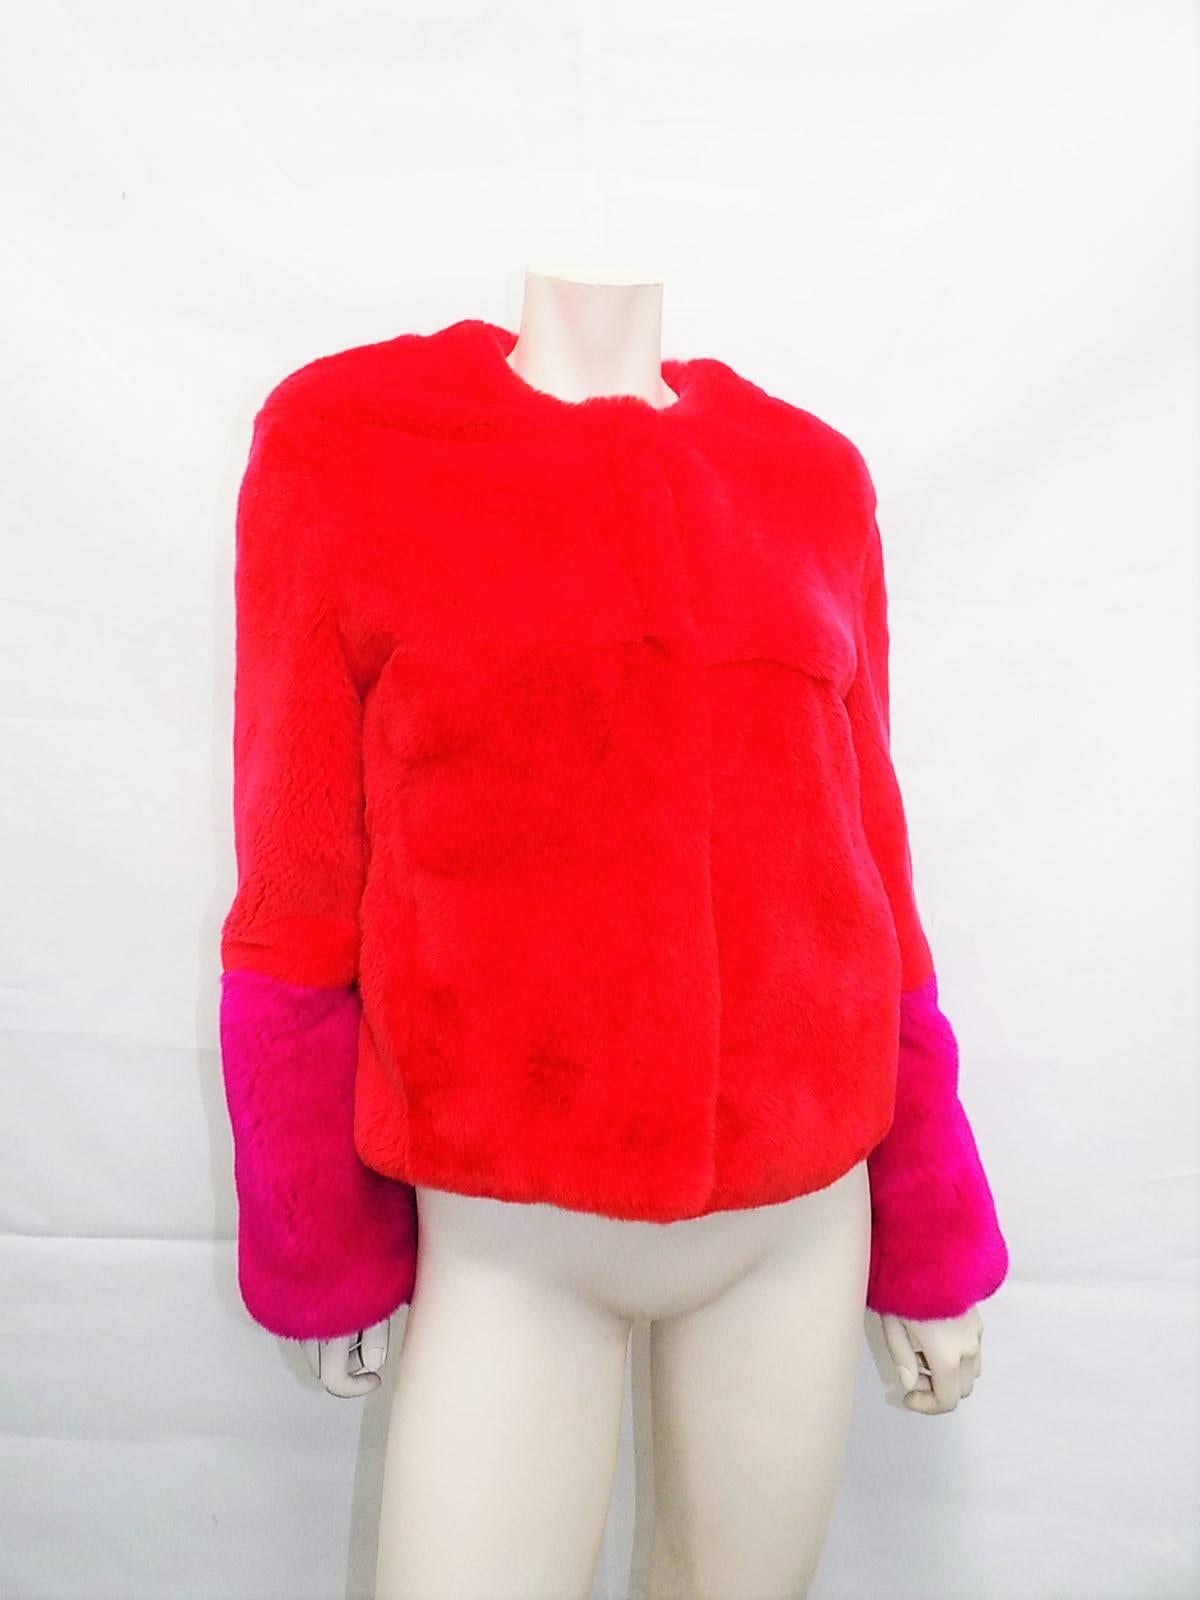 Women's Red Rex Rabbit short fur jacket with  Fushia  Cuffs . MUst Have!! NEW!